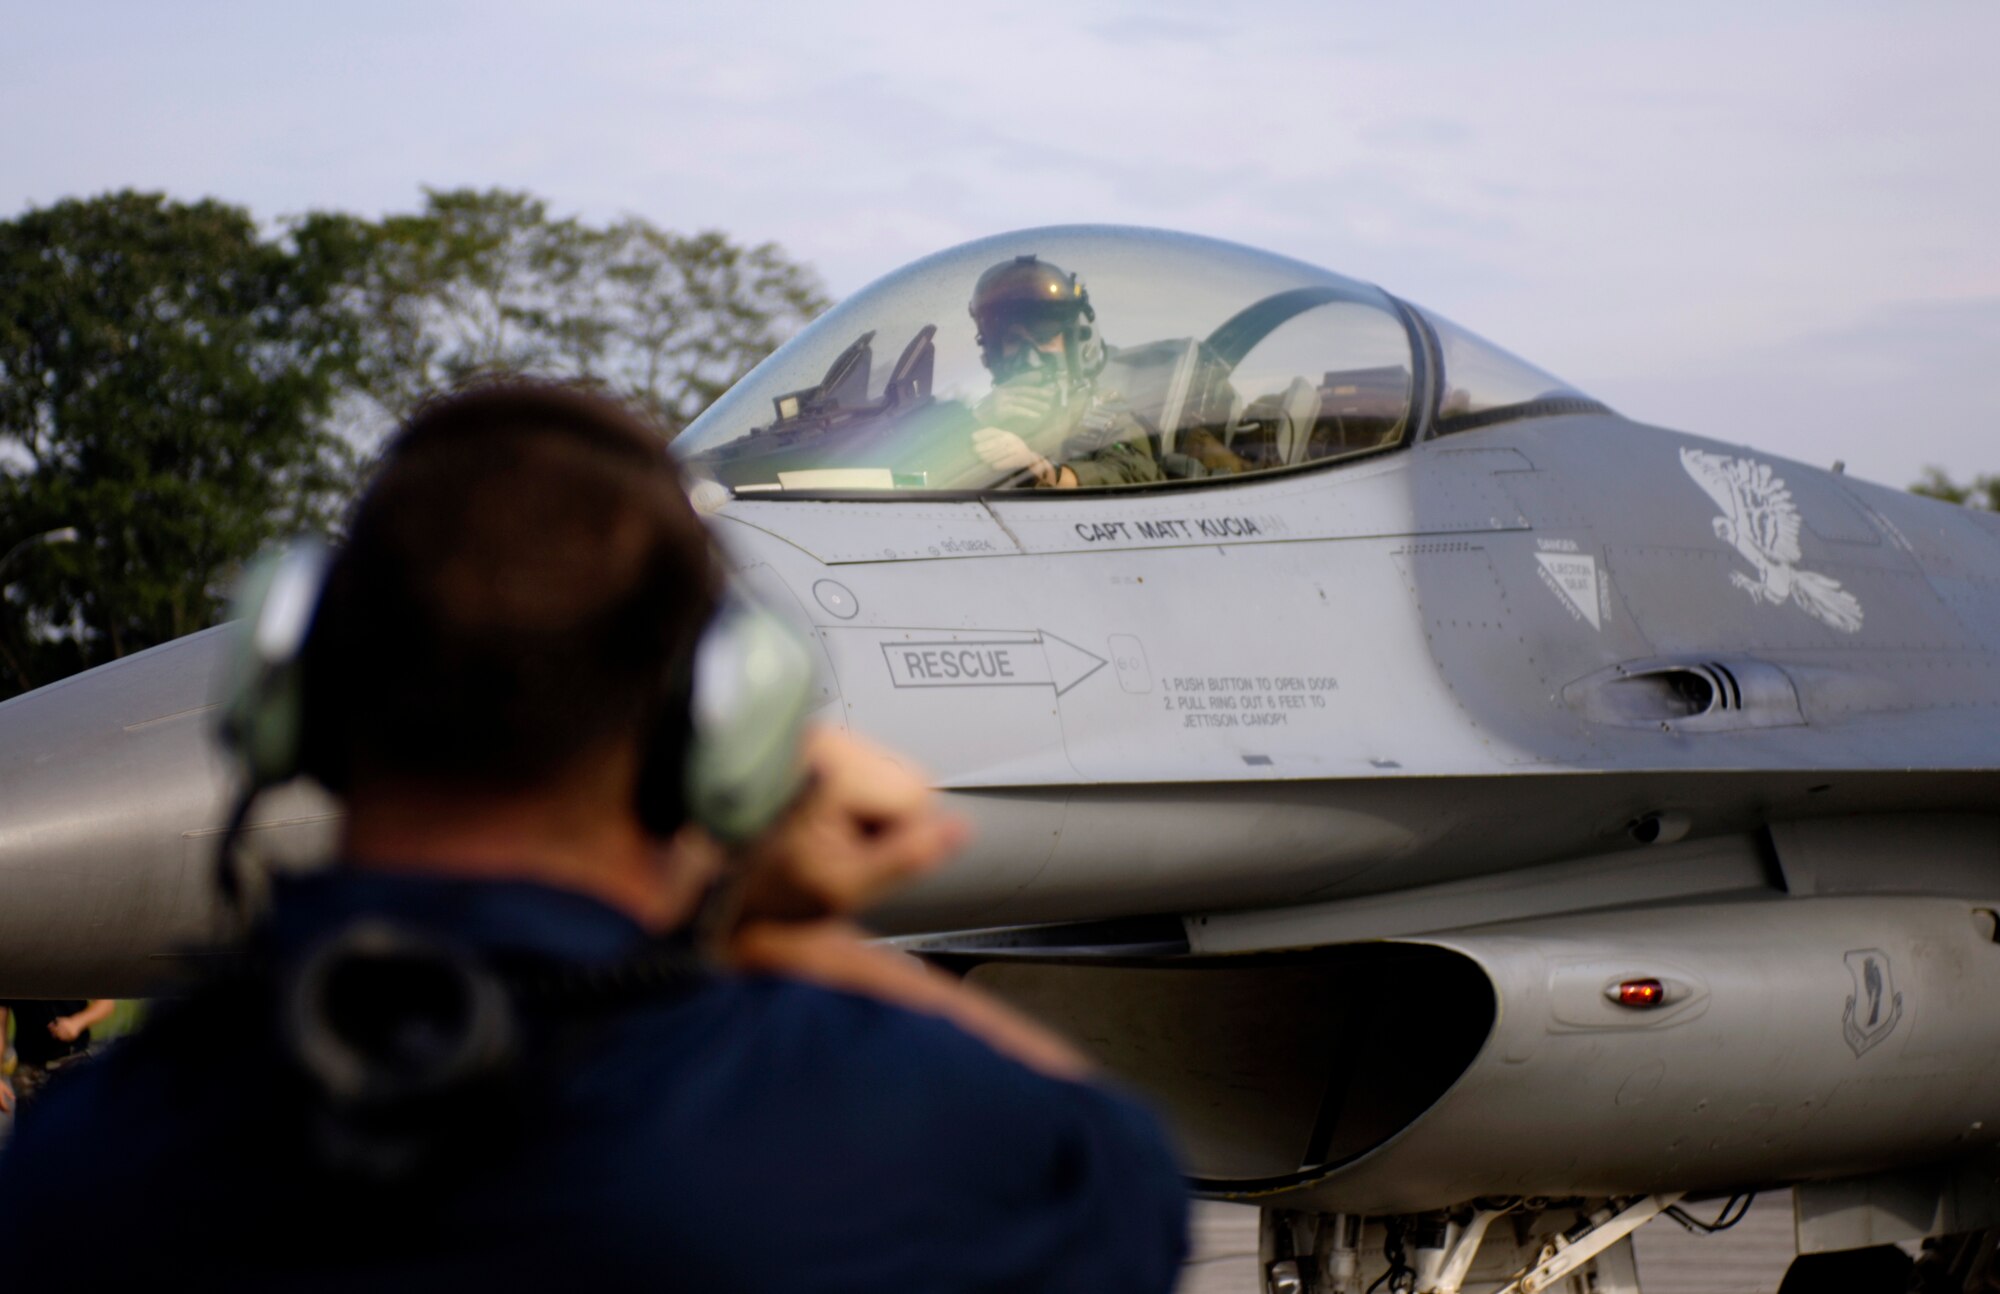 PAYA LEBAR AIR BASE, Singapore -- Staff Sgt. Keith White prepares to launch his F-16 Fighting Falcon for a mission Paya Lebar Air Base, Singapore, during Exercise Commando Sling. The annual exercise began in 1990 to provide combined air combat training for U.S. Air Force and Singapore Air Force fighter units. The exercise enables units to sharpen air combat skills, improve procedures for sustained operations at a non-U.S. base, and promote closer relations between the two air forces and nations. Sergeant White is a crew chief from the 14th Fighter Squadron, 35th Fighter Wing, Misawa, Japan. (U.S. Air Force photo by Tech. Sgt. Shane A. Cuomo)

